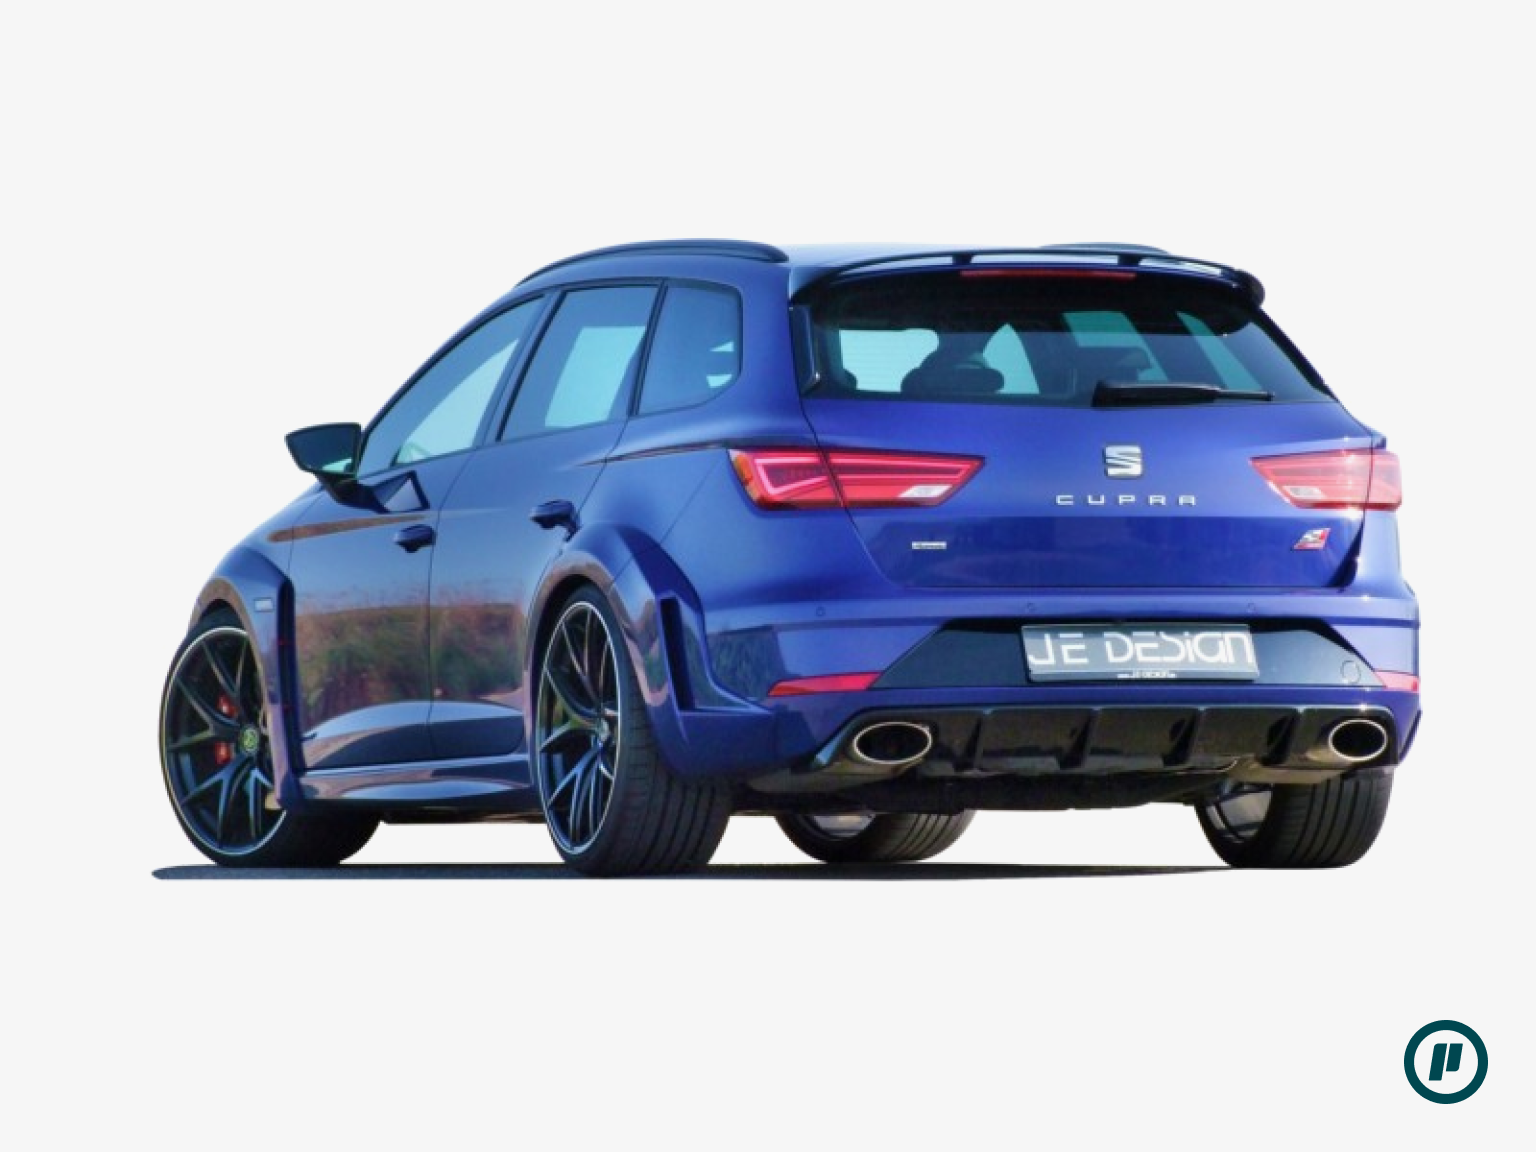 JE Design - Aero Kit Widebody for Seat Leon 5F (Compatible with FR, ST & Cupra)